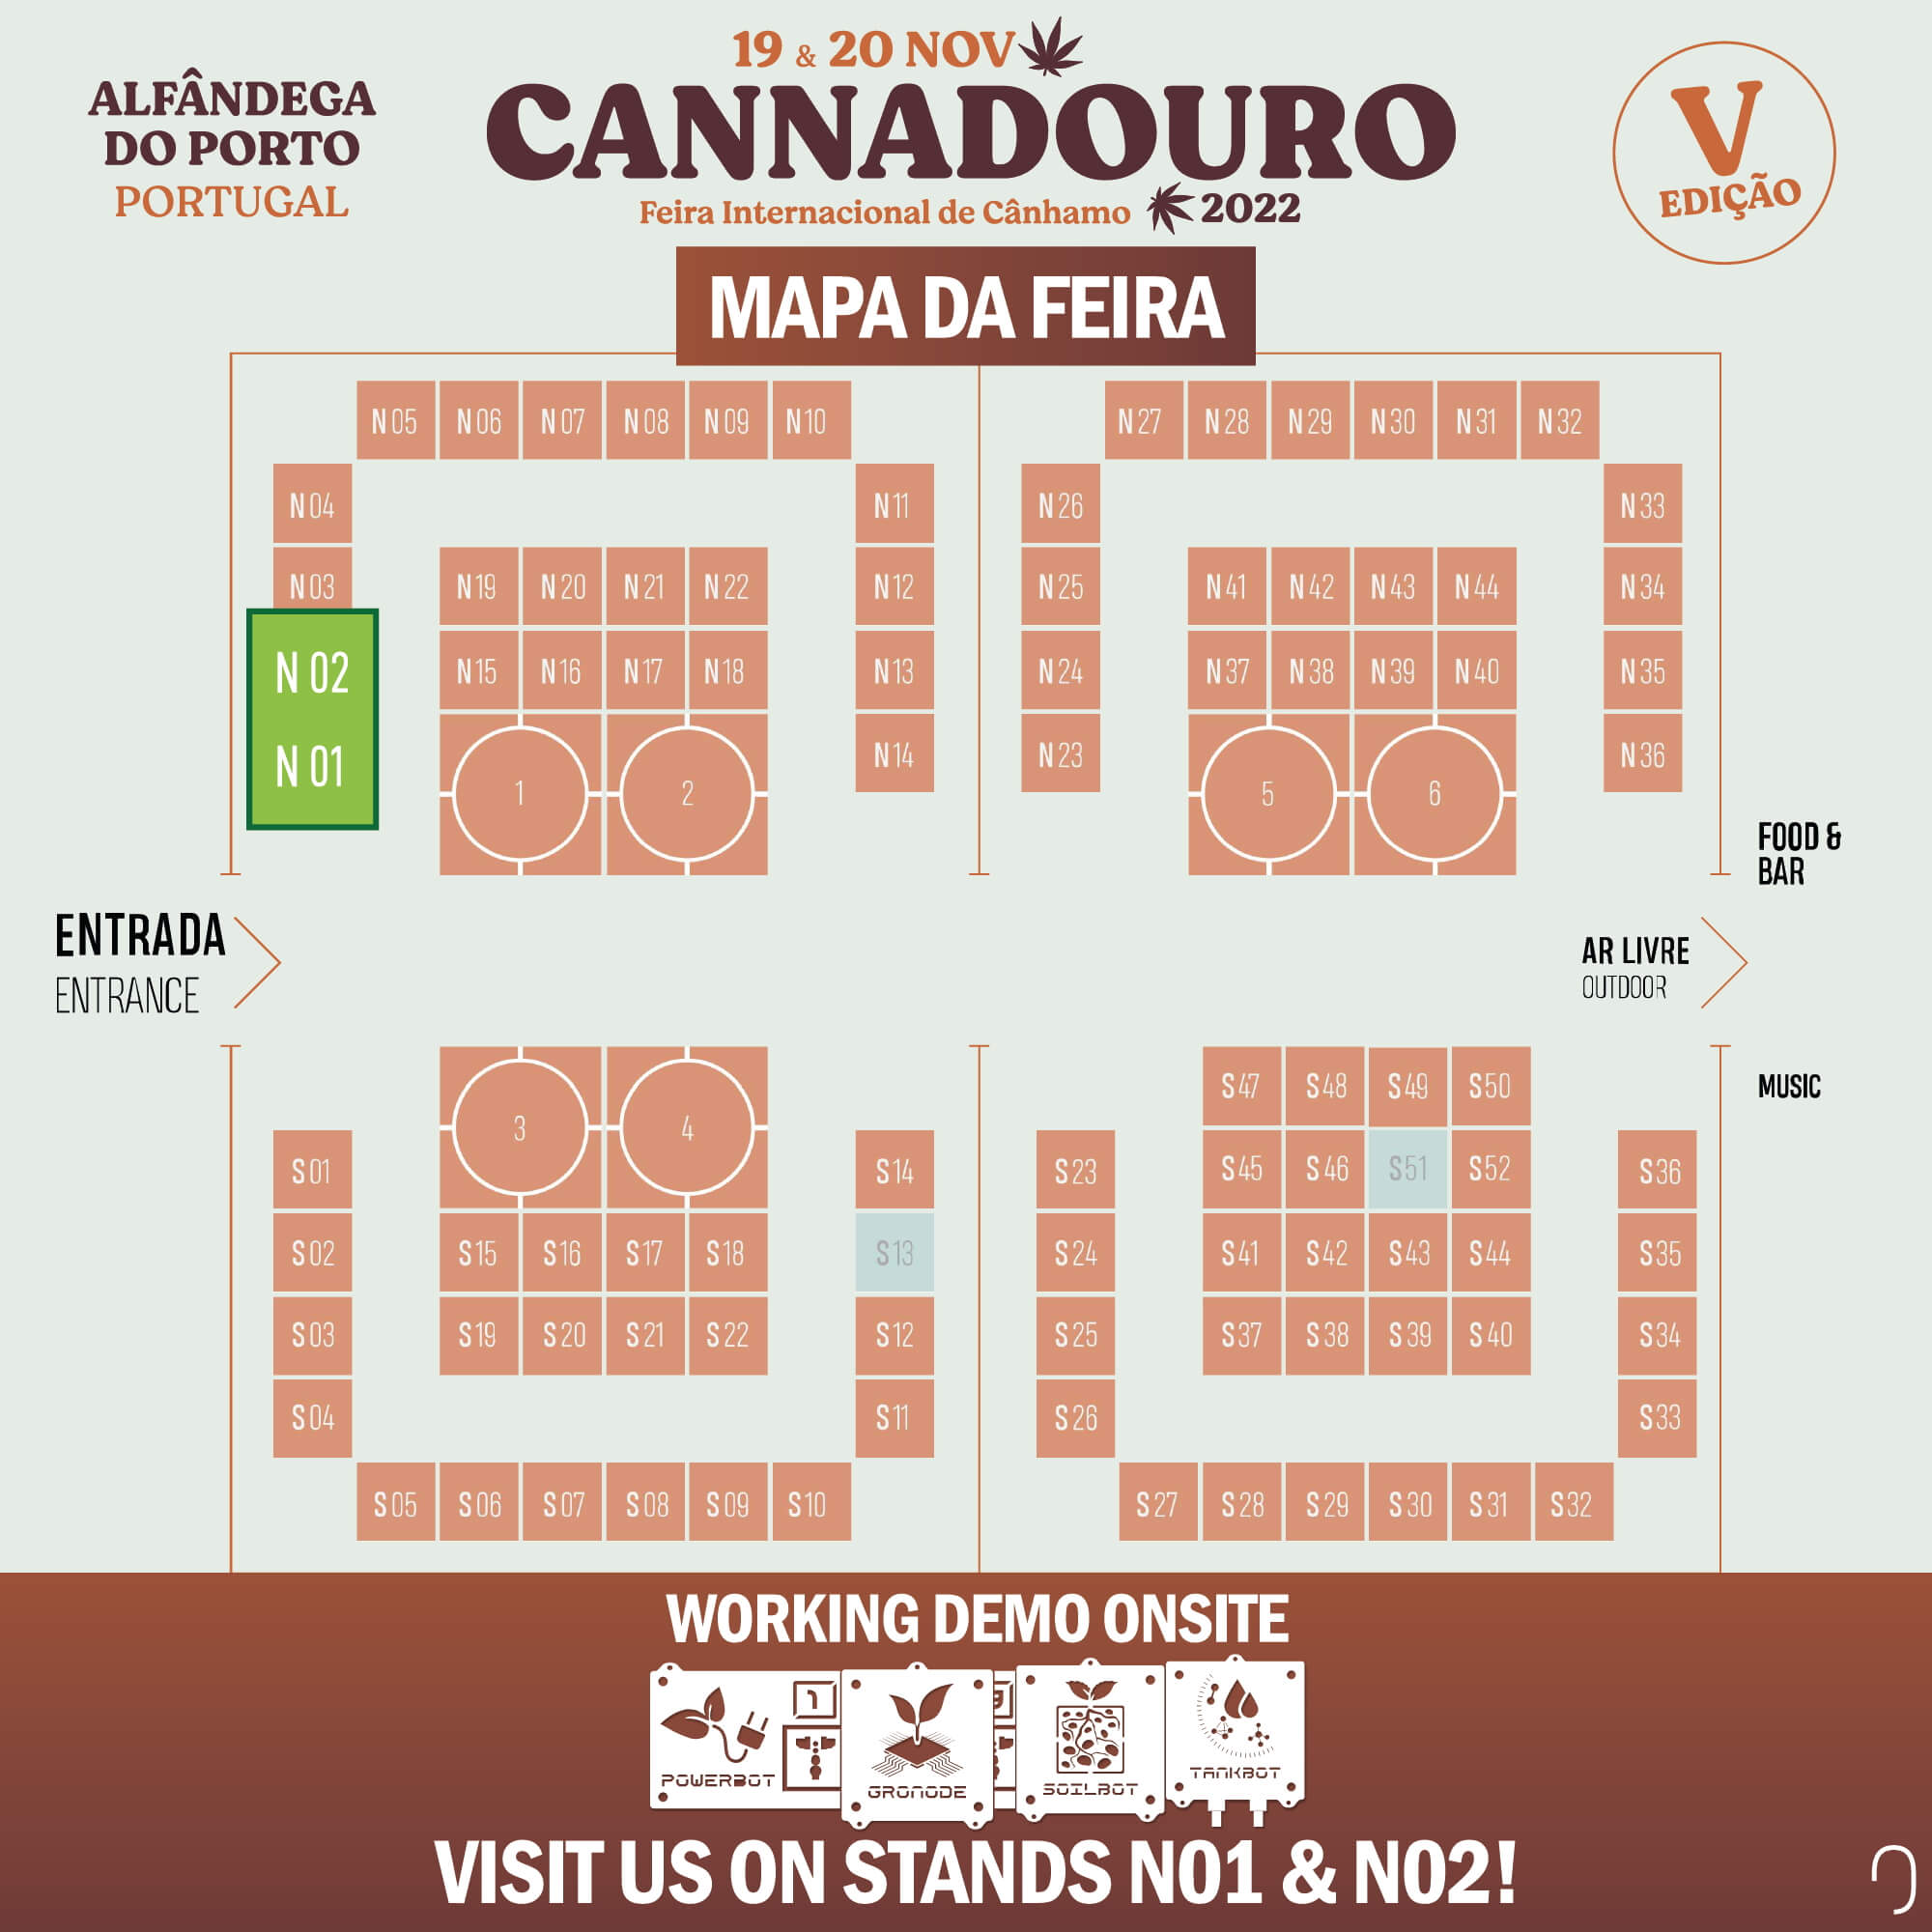 Fair Map - Stands N01 and N02 - Open Grow™ will be present at Cannadouro 2022, Porto, Portugal - November 19-20